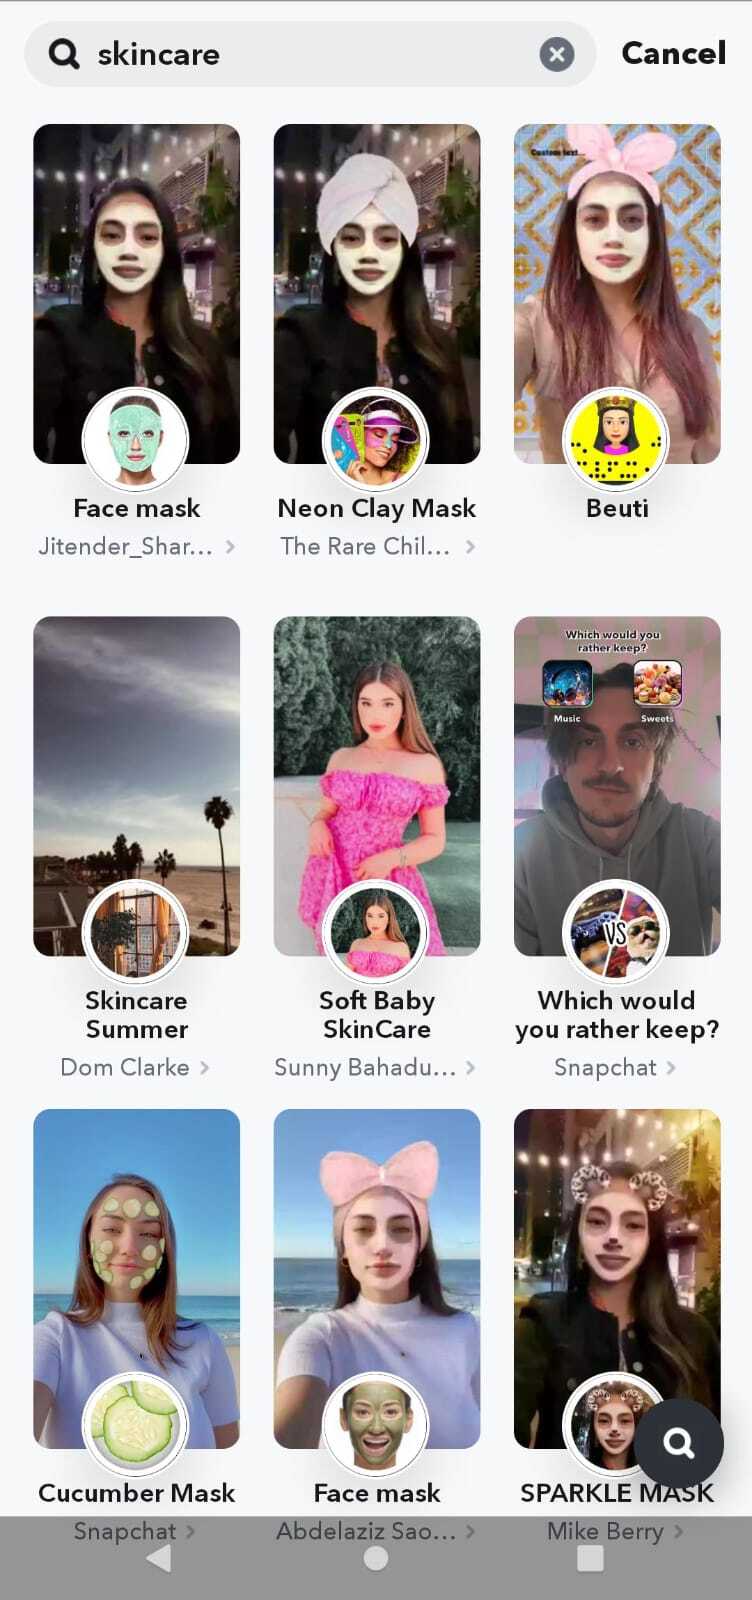 How to find niche content on Snapchat